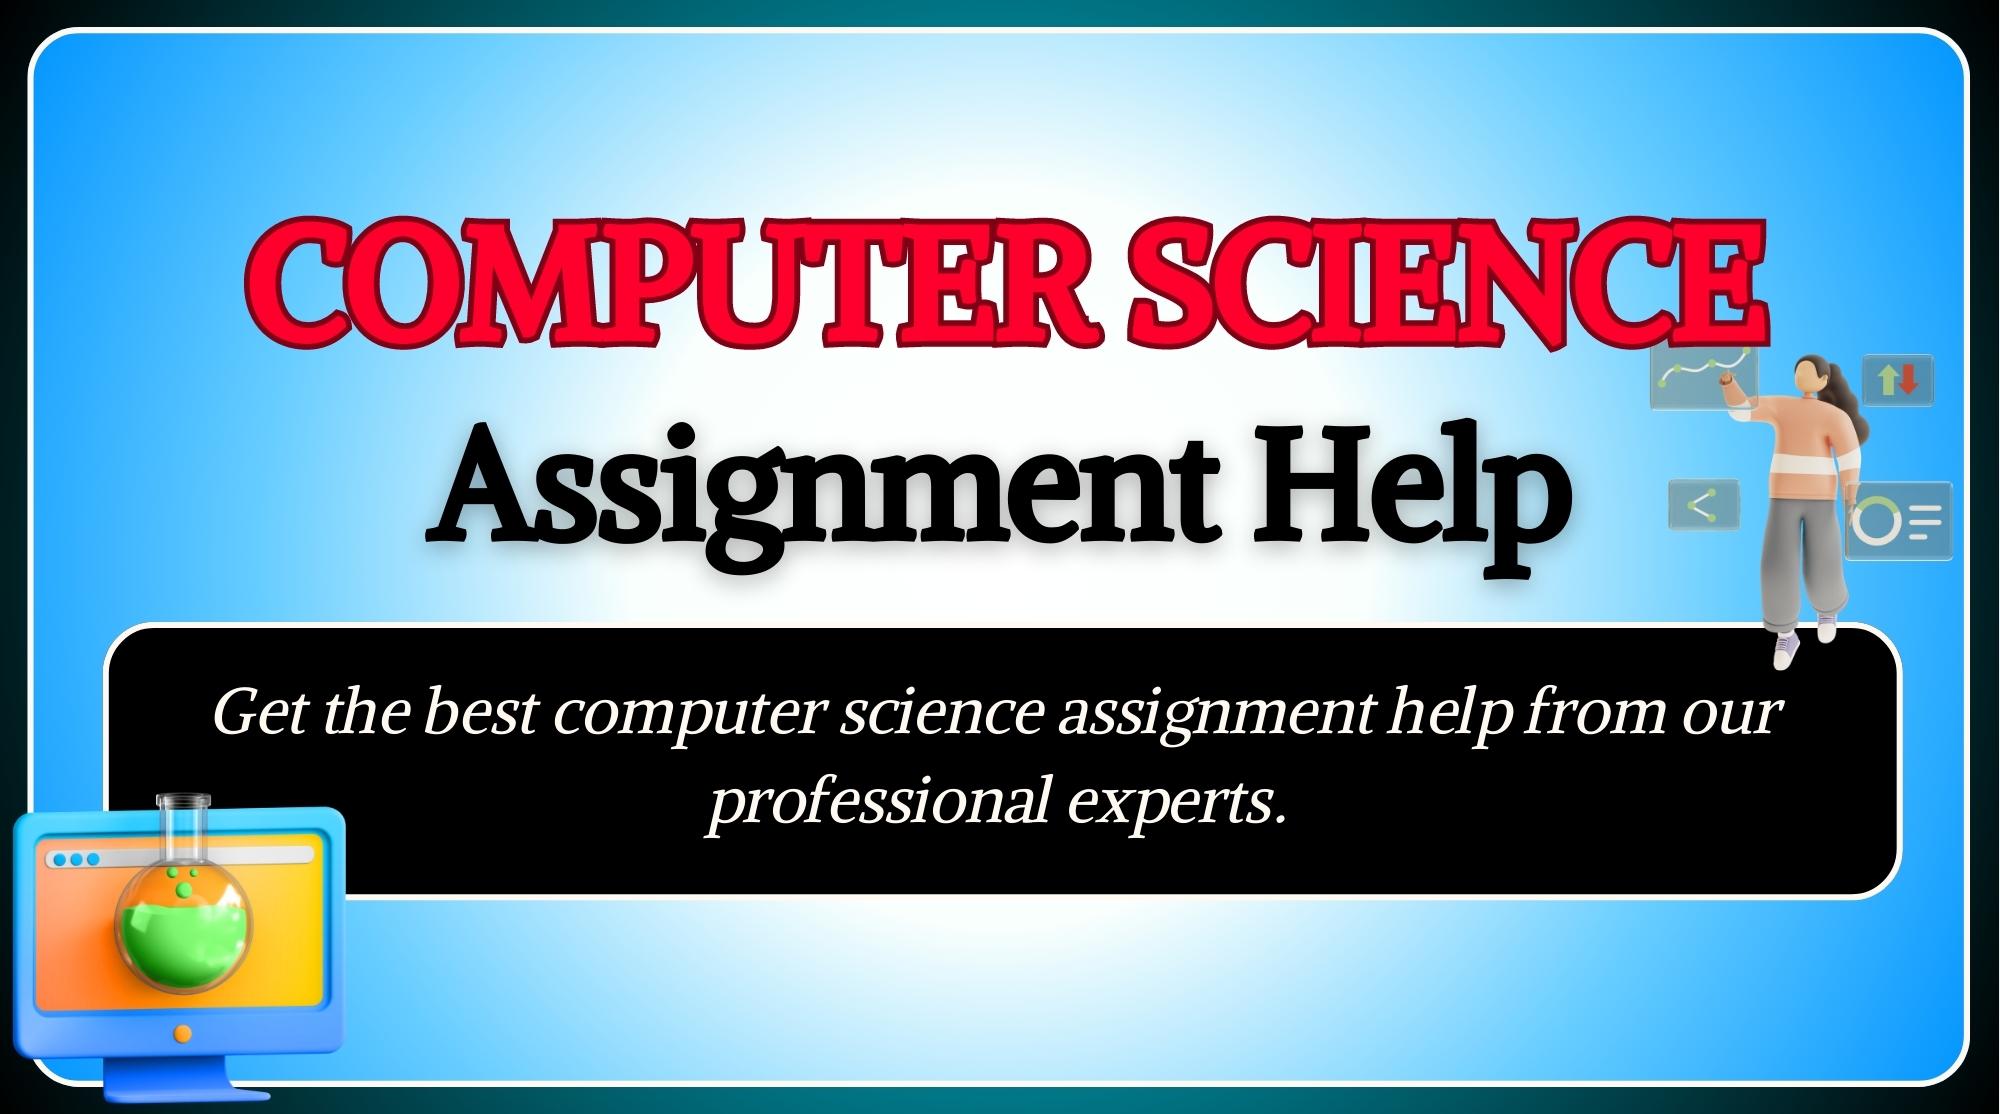 Computer Science Assignment Help - Get Help from Professional Experts at BEWS